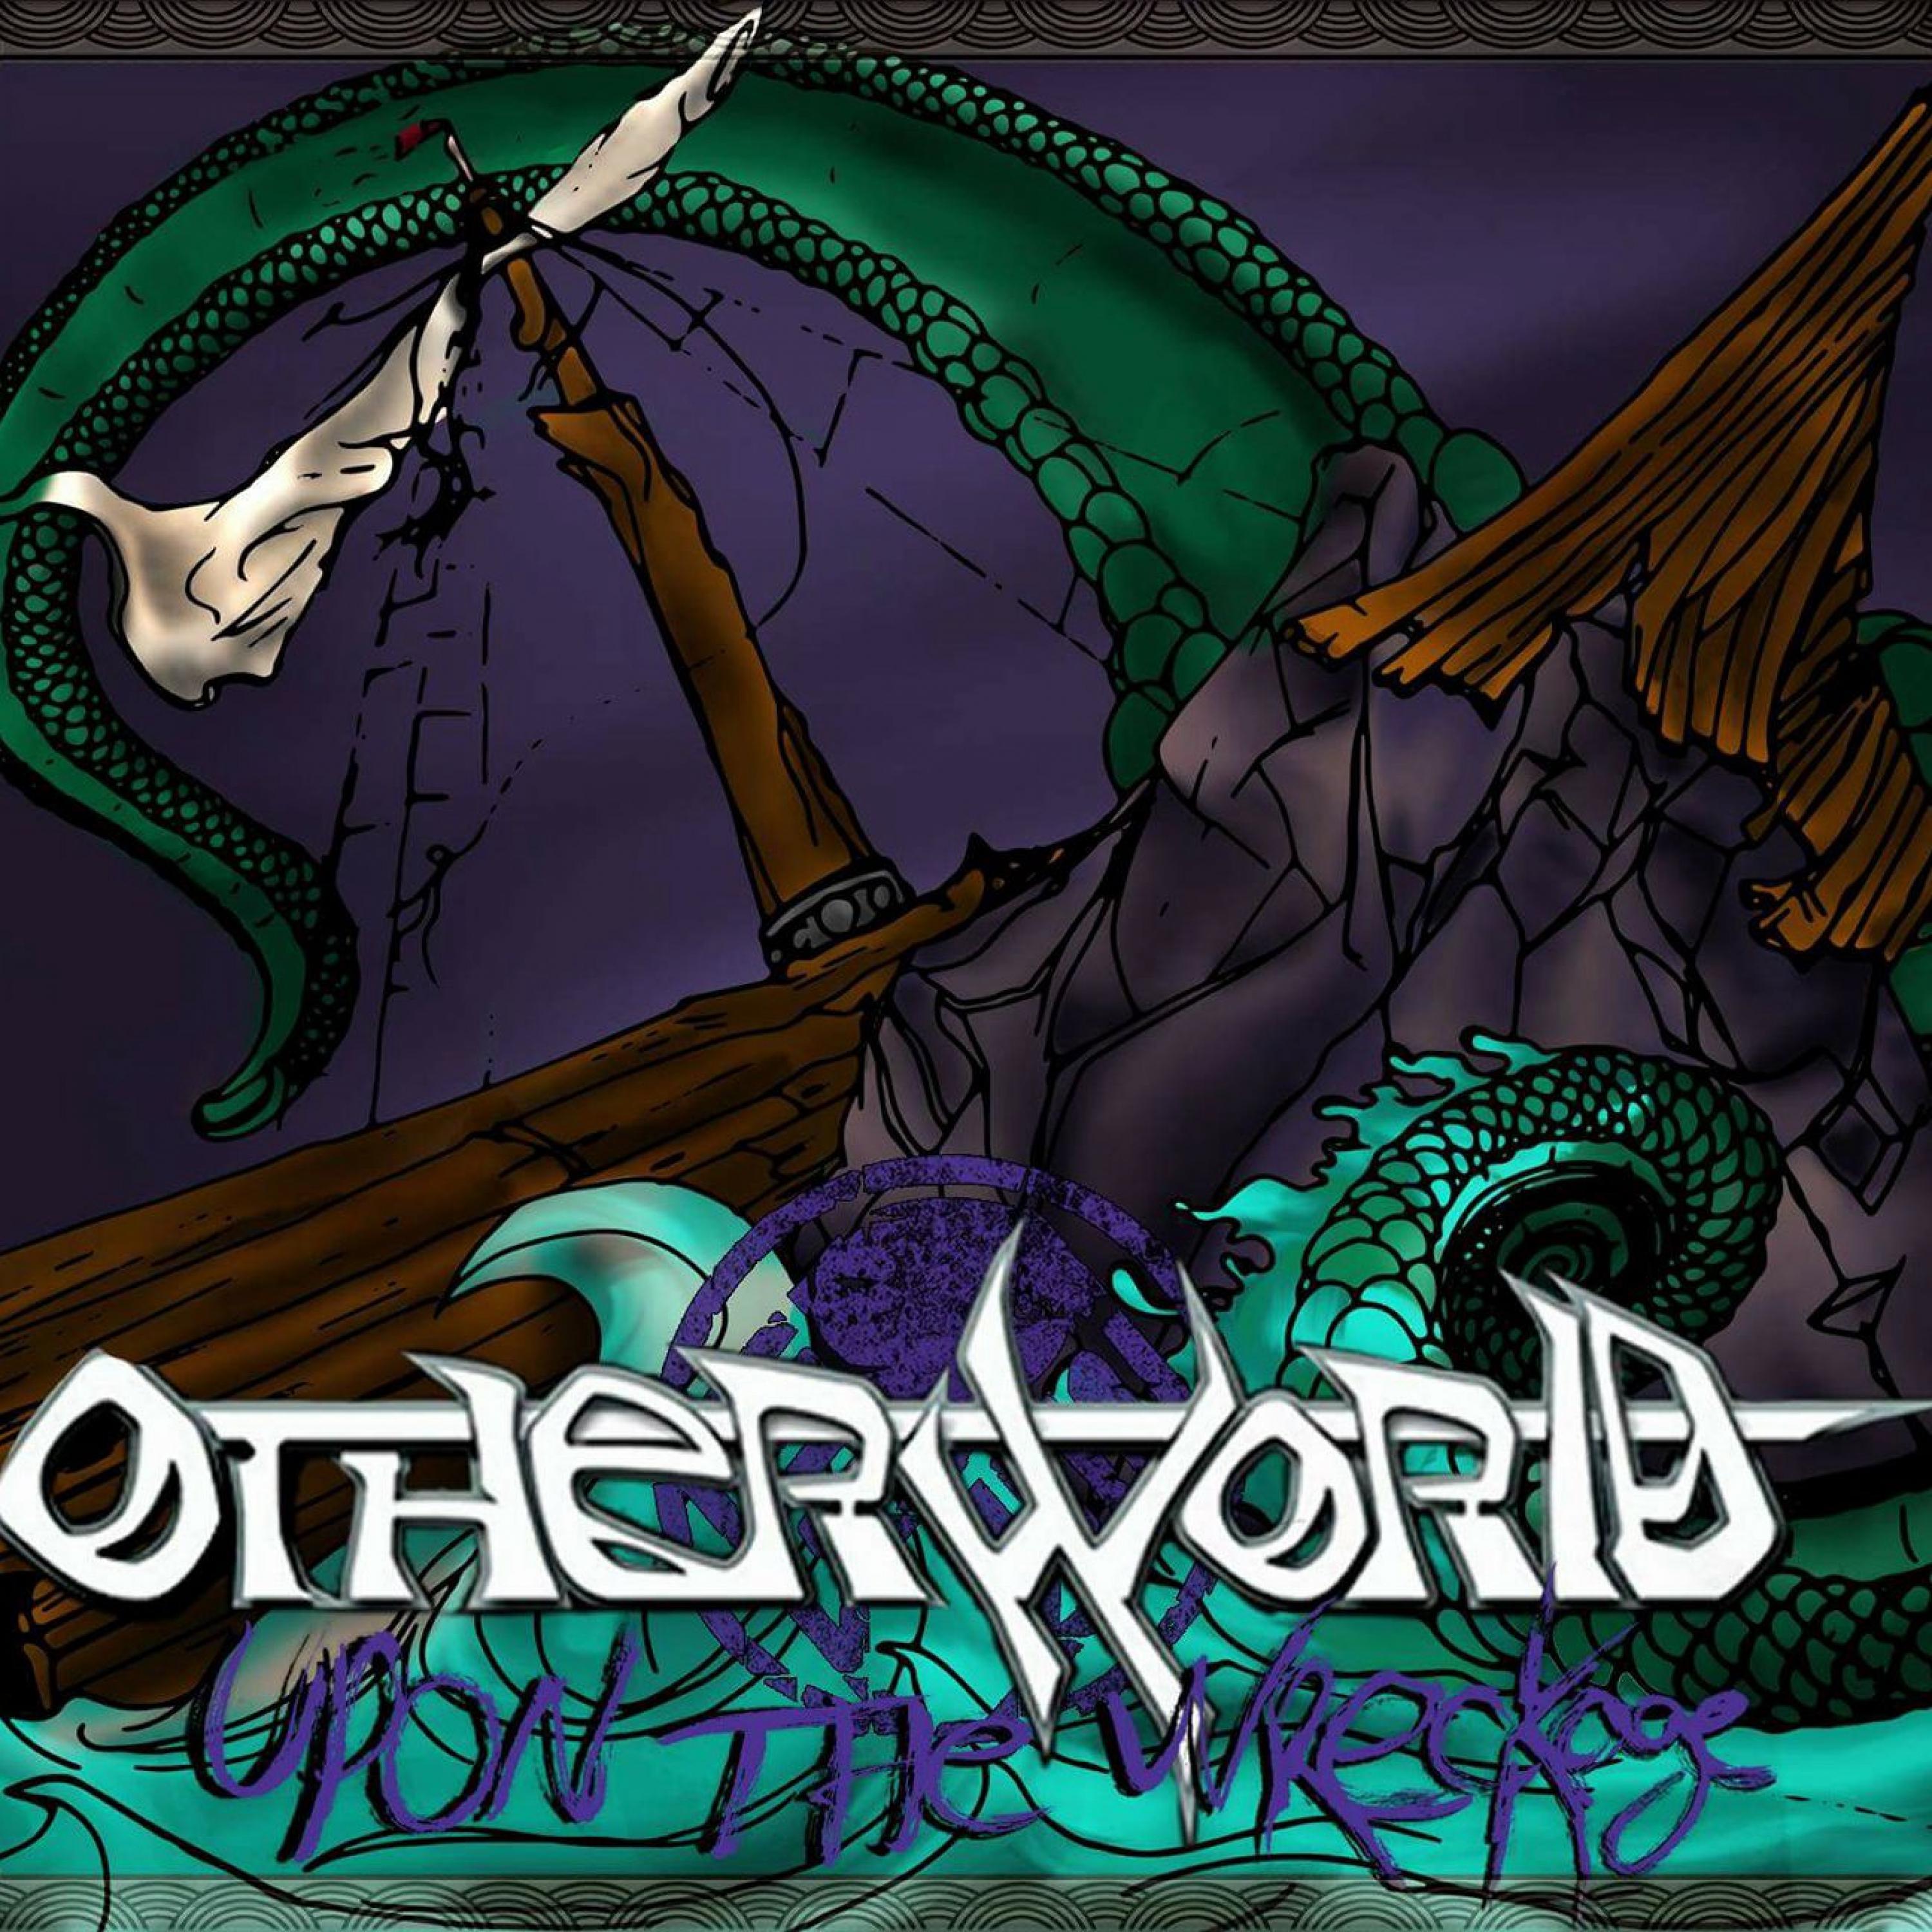 Otherworld - Ashes to Ashes